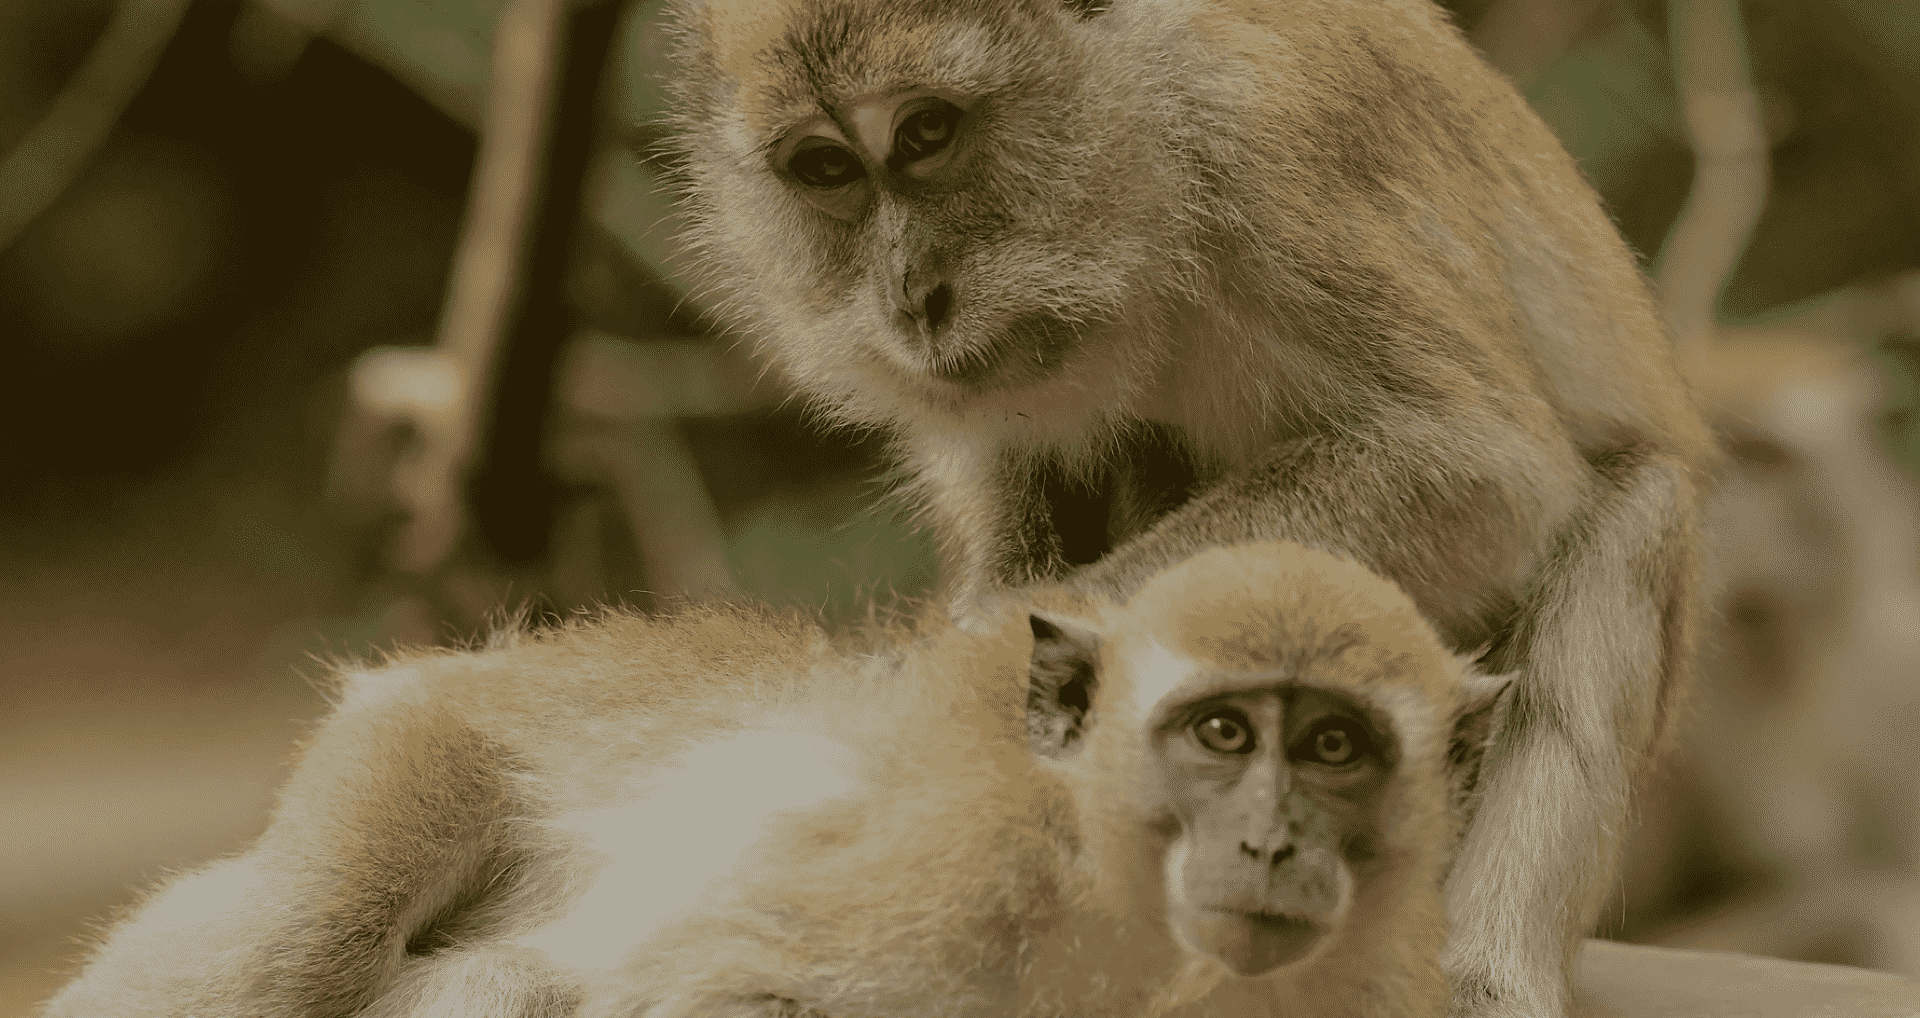 cynomolgus macaques are most commonly used in scientific research